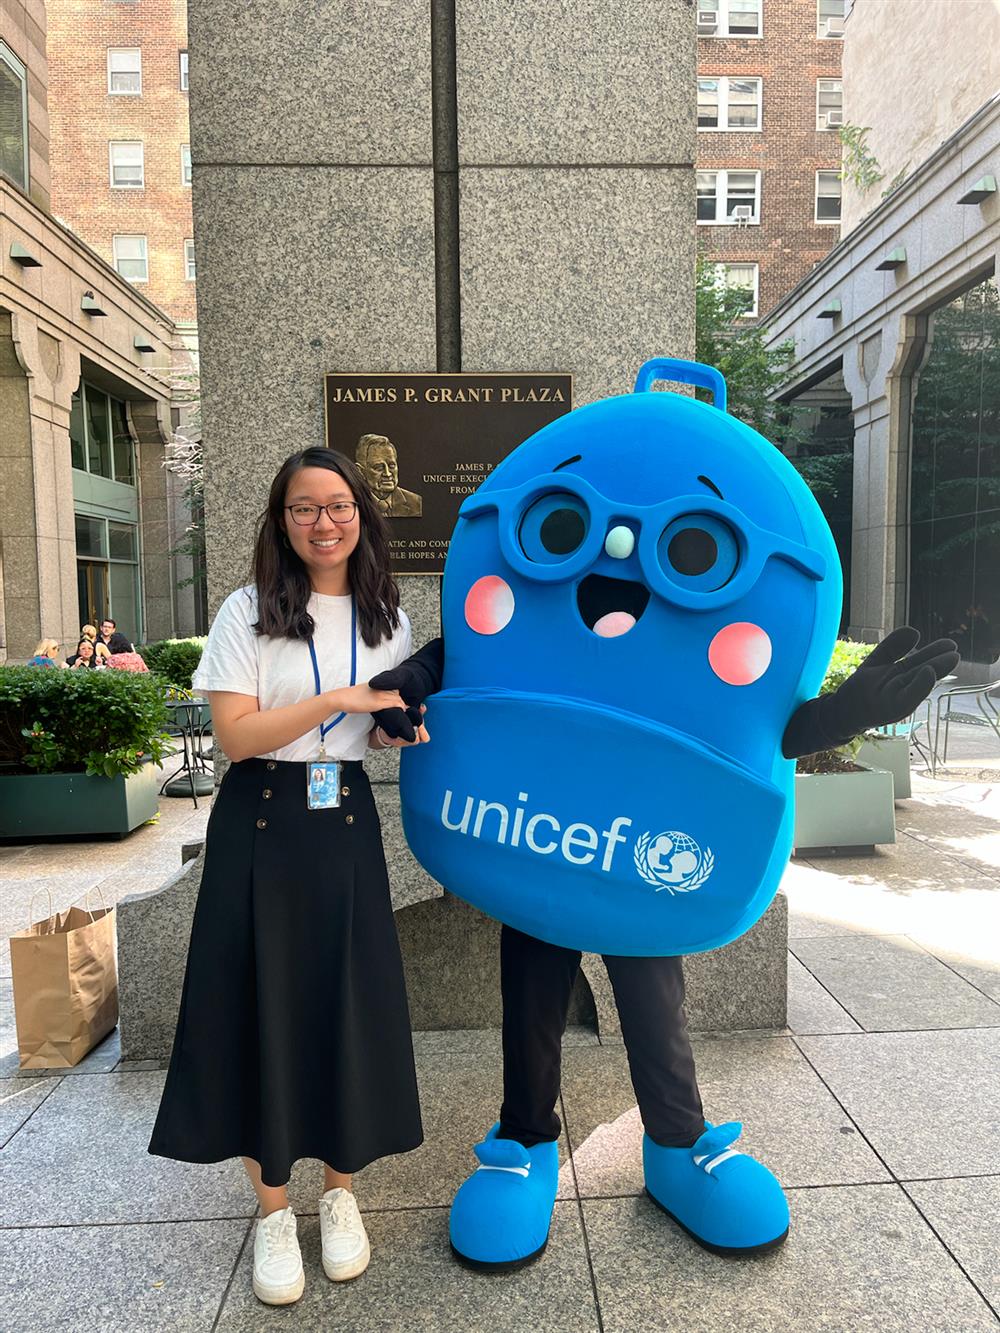 Actively interning helped this Fudan student find a career direction, from teaching Yunnan as a freshman to entering UNICEF International | Children | Student